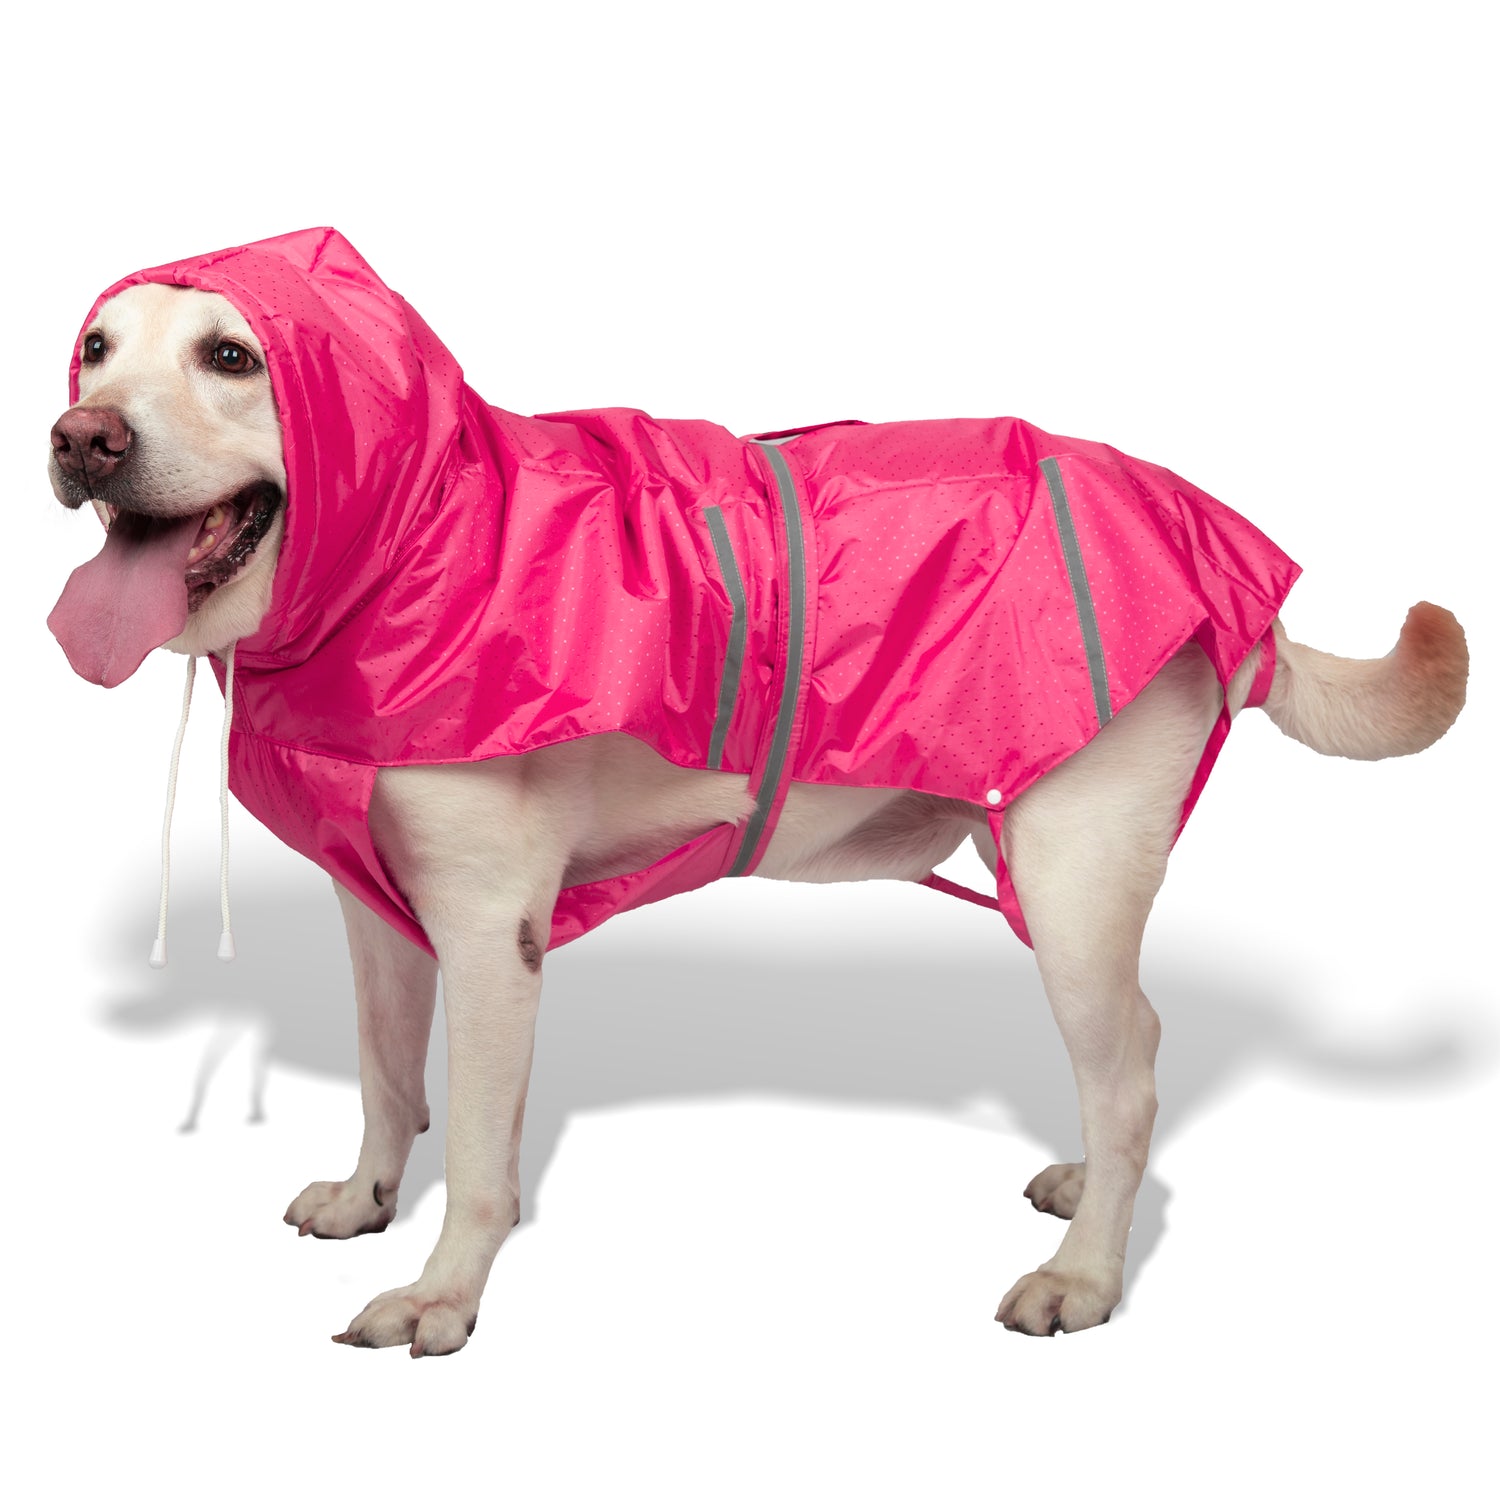 Get your pooch ready for the monsoons with their own rainwear!